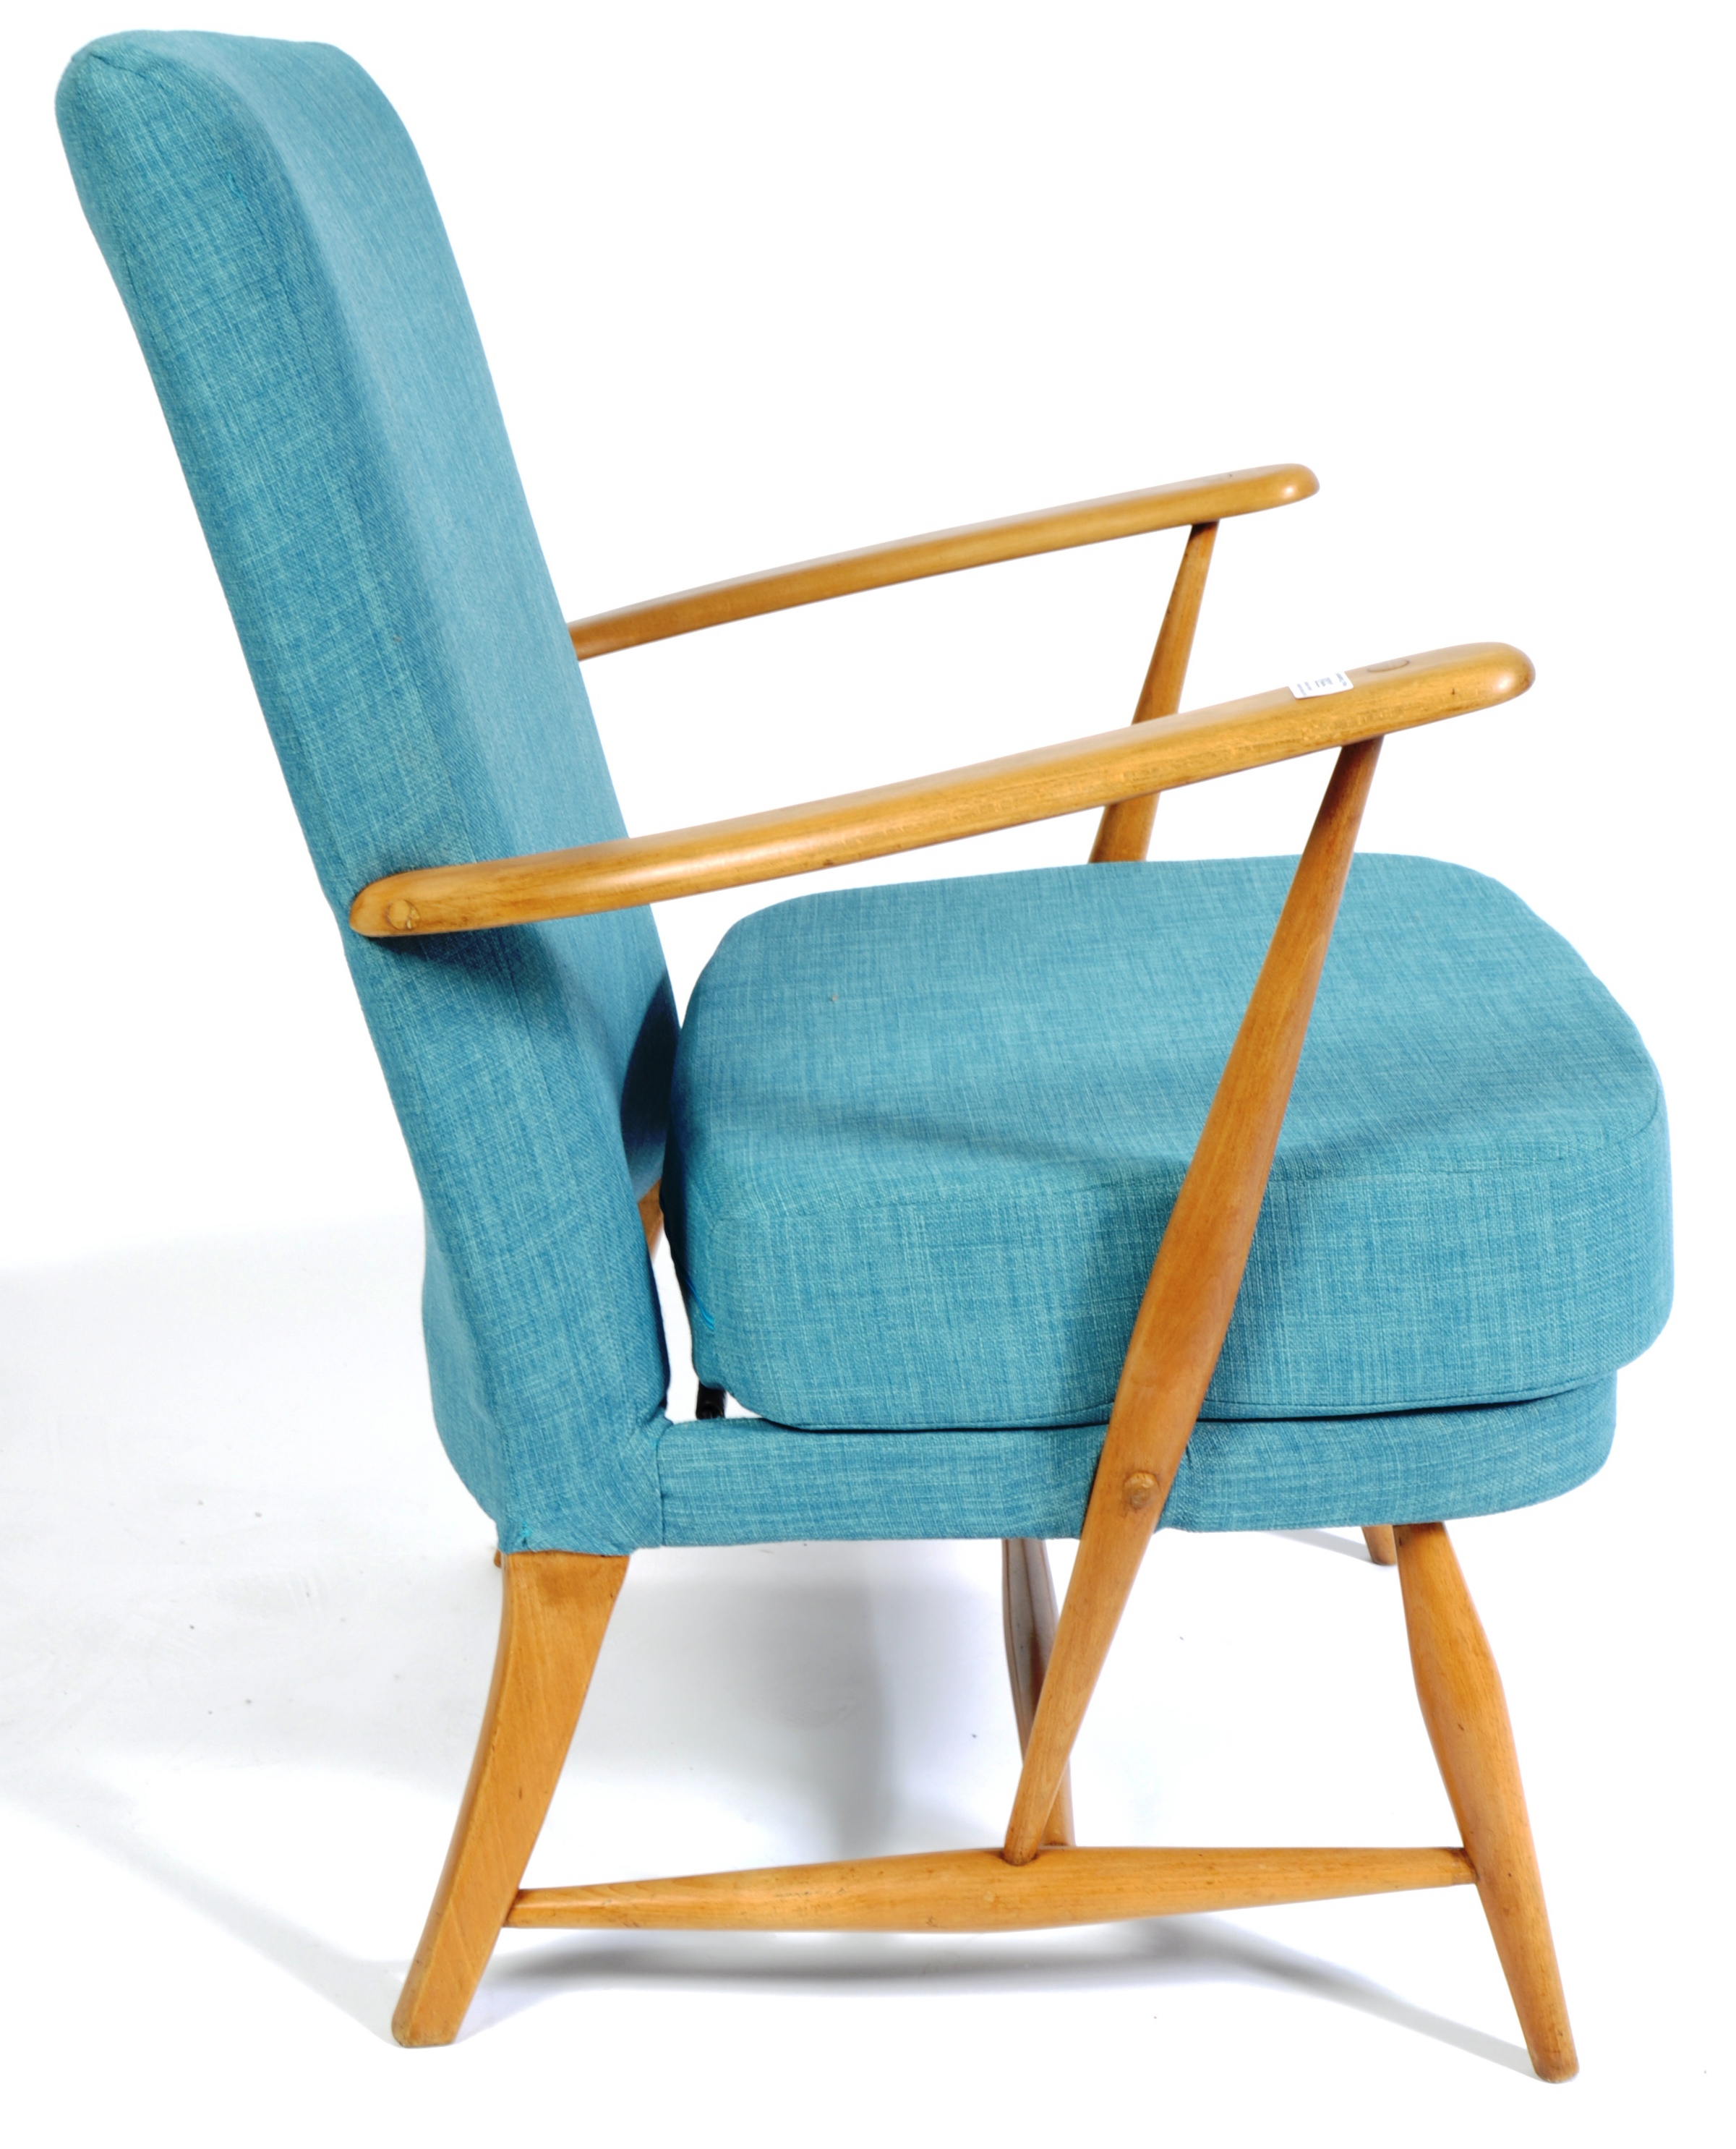 ERCOL MODEL 248 1950'S BEECH AND ELM LOUNGE CHAIR BY L. ERCOLANI - Image 5 of 6